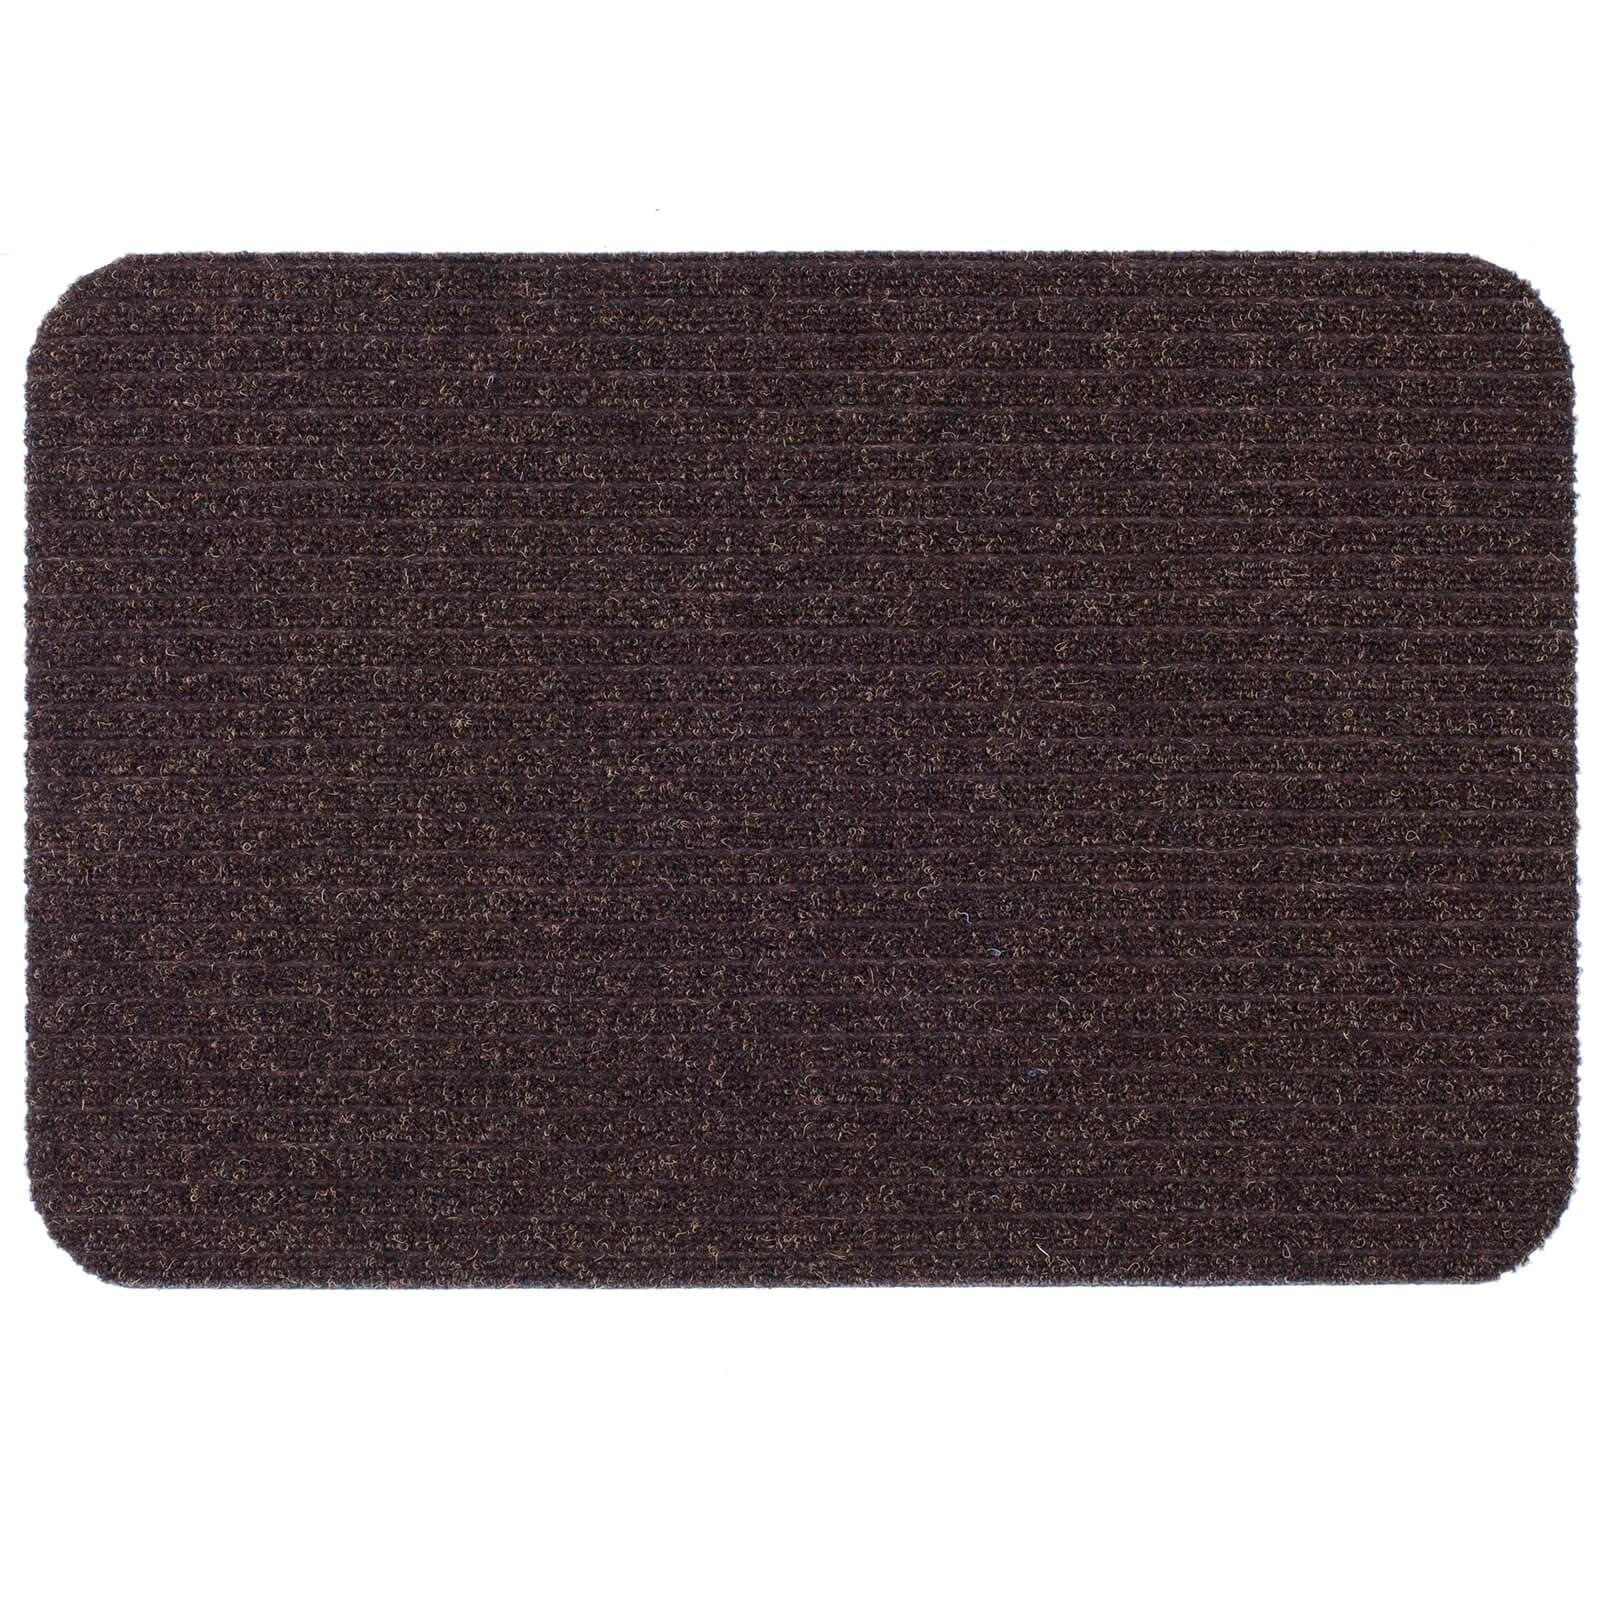 Photo of Titan Ribbed Barrier Mat - Brown